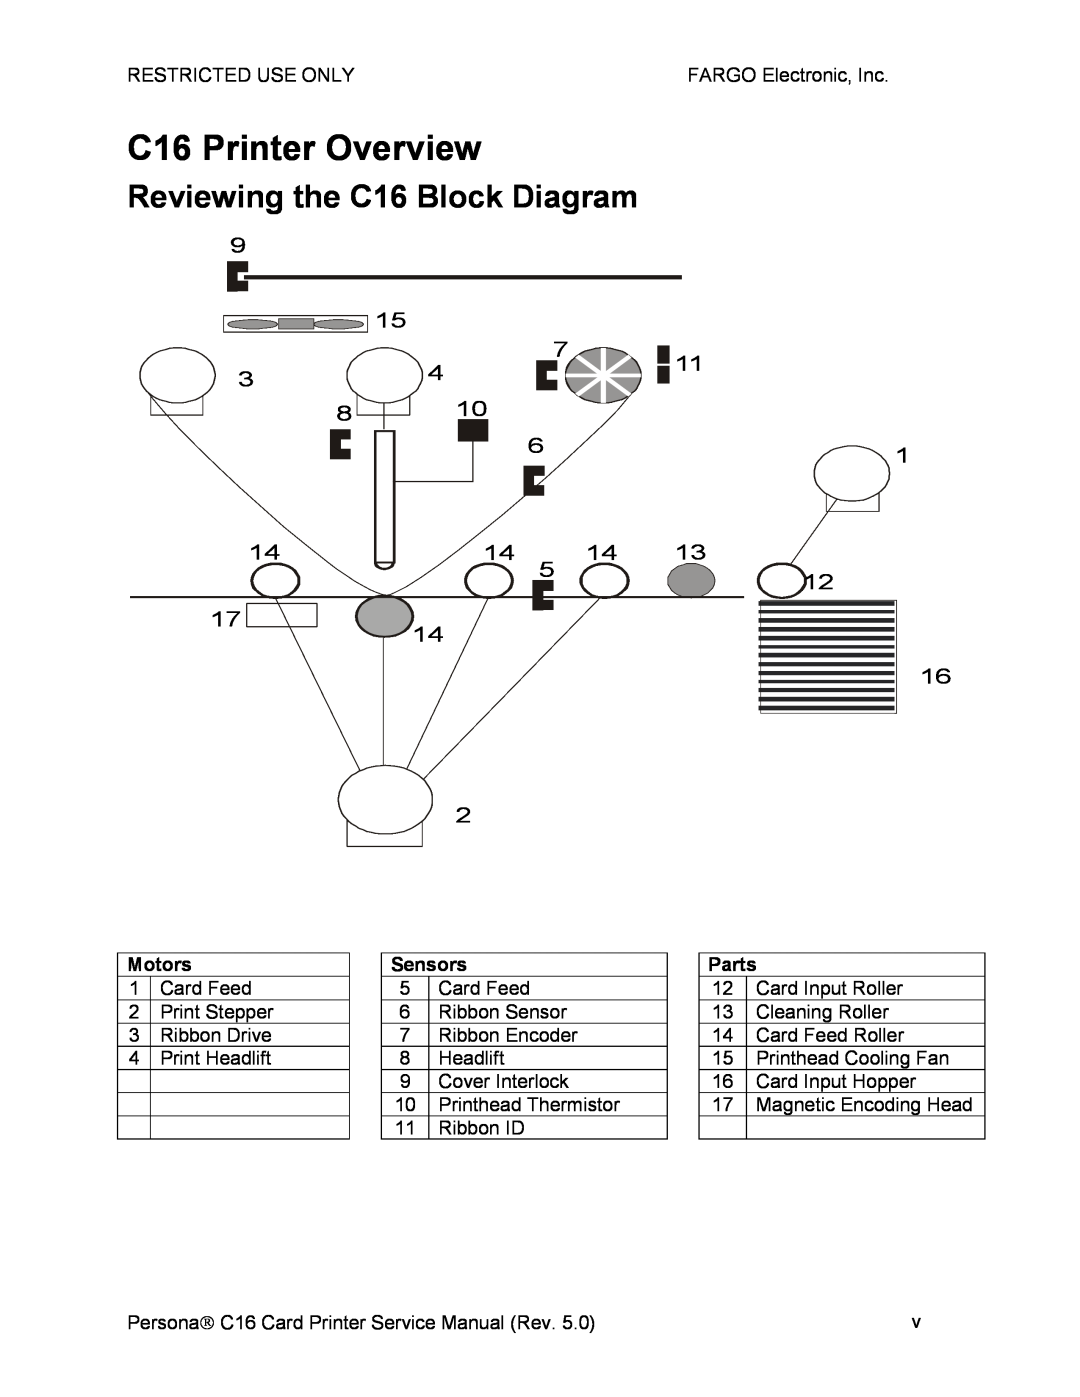 FARGO electronic service manual C16 Printer Overview, Reviewing the C16 Block Diagram 